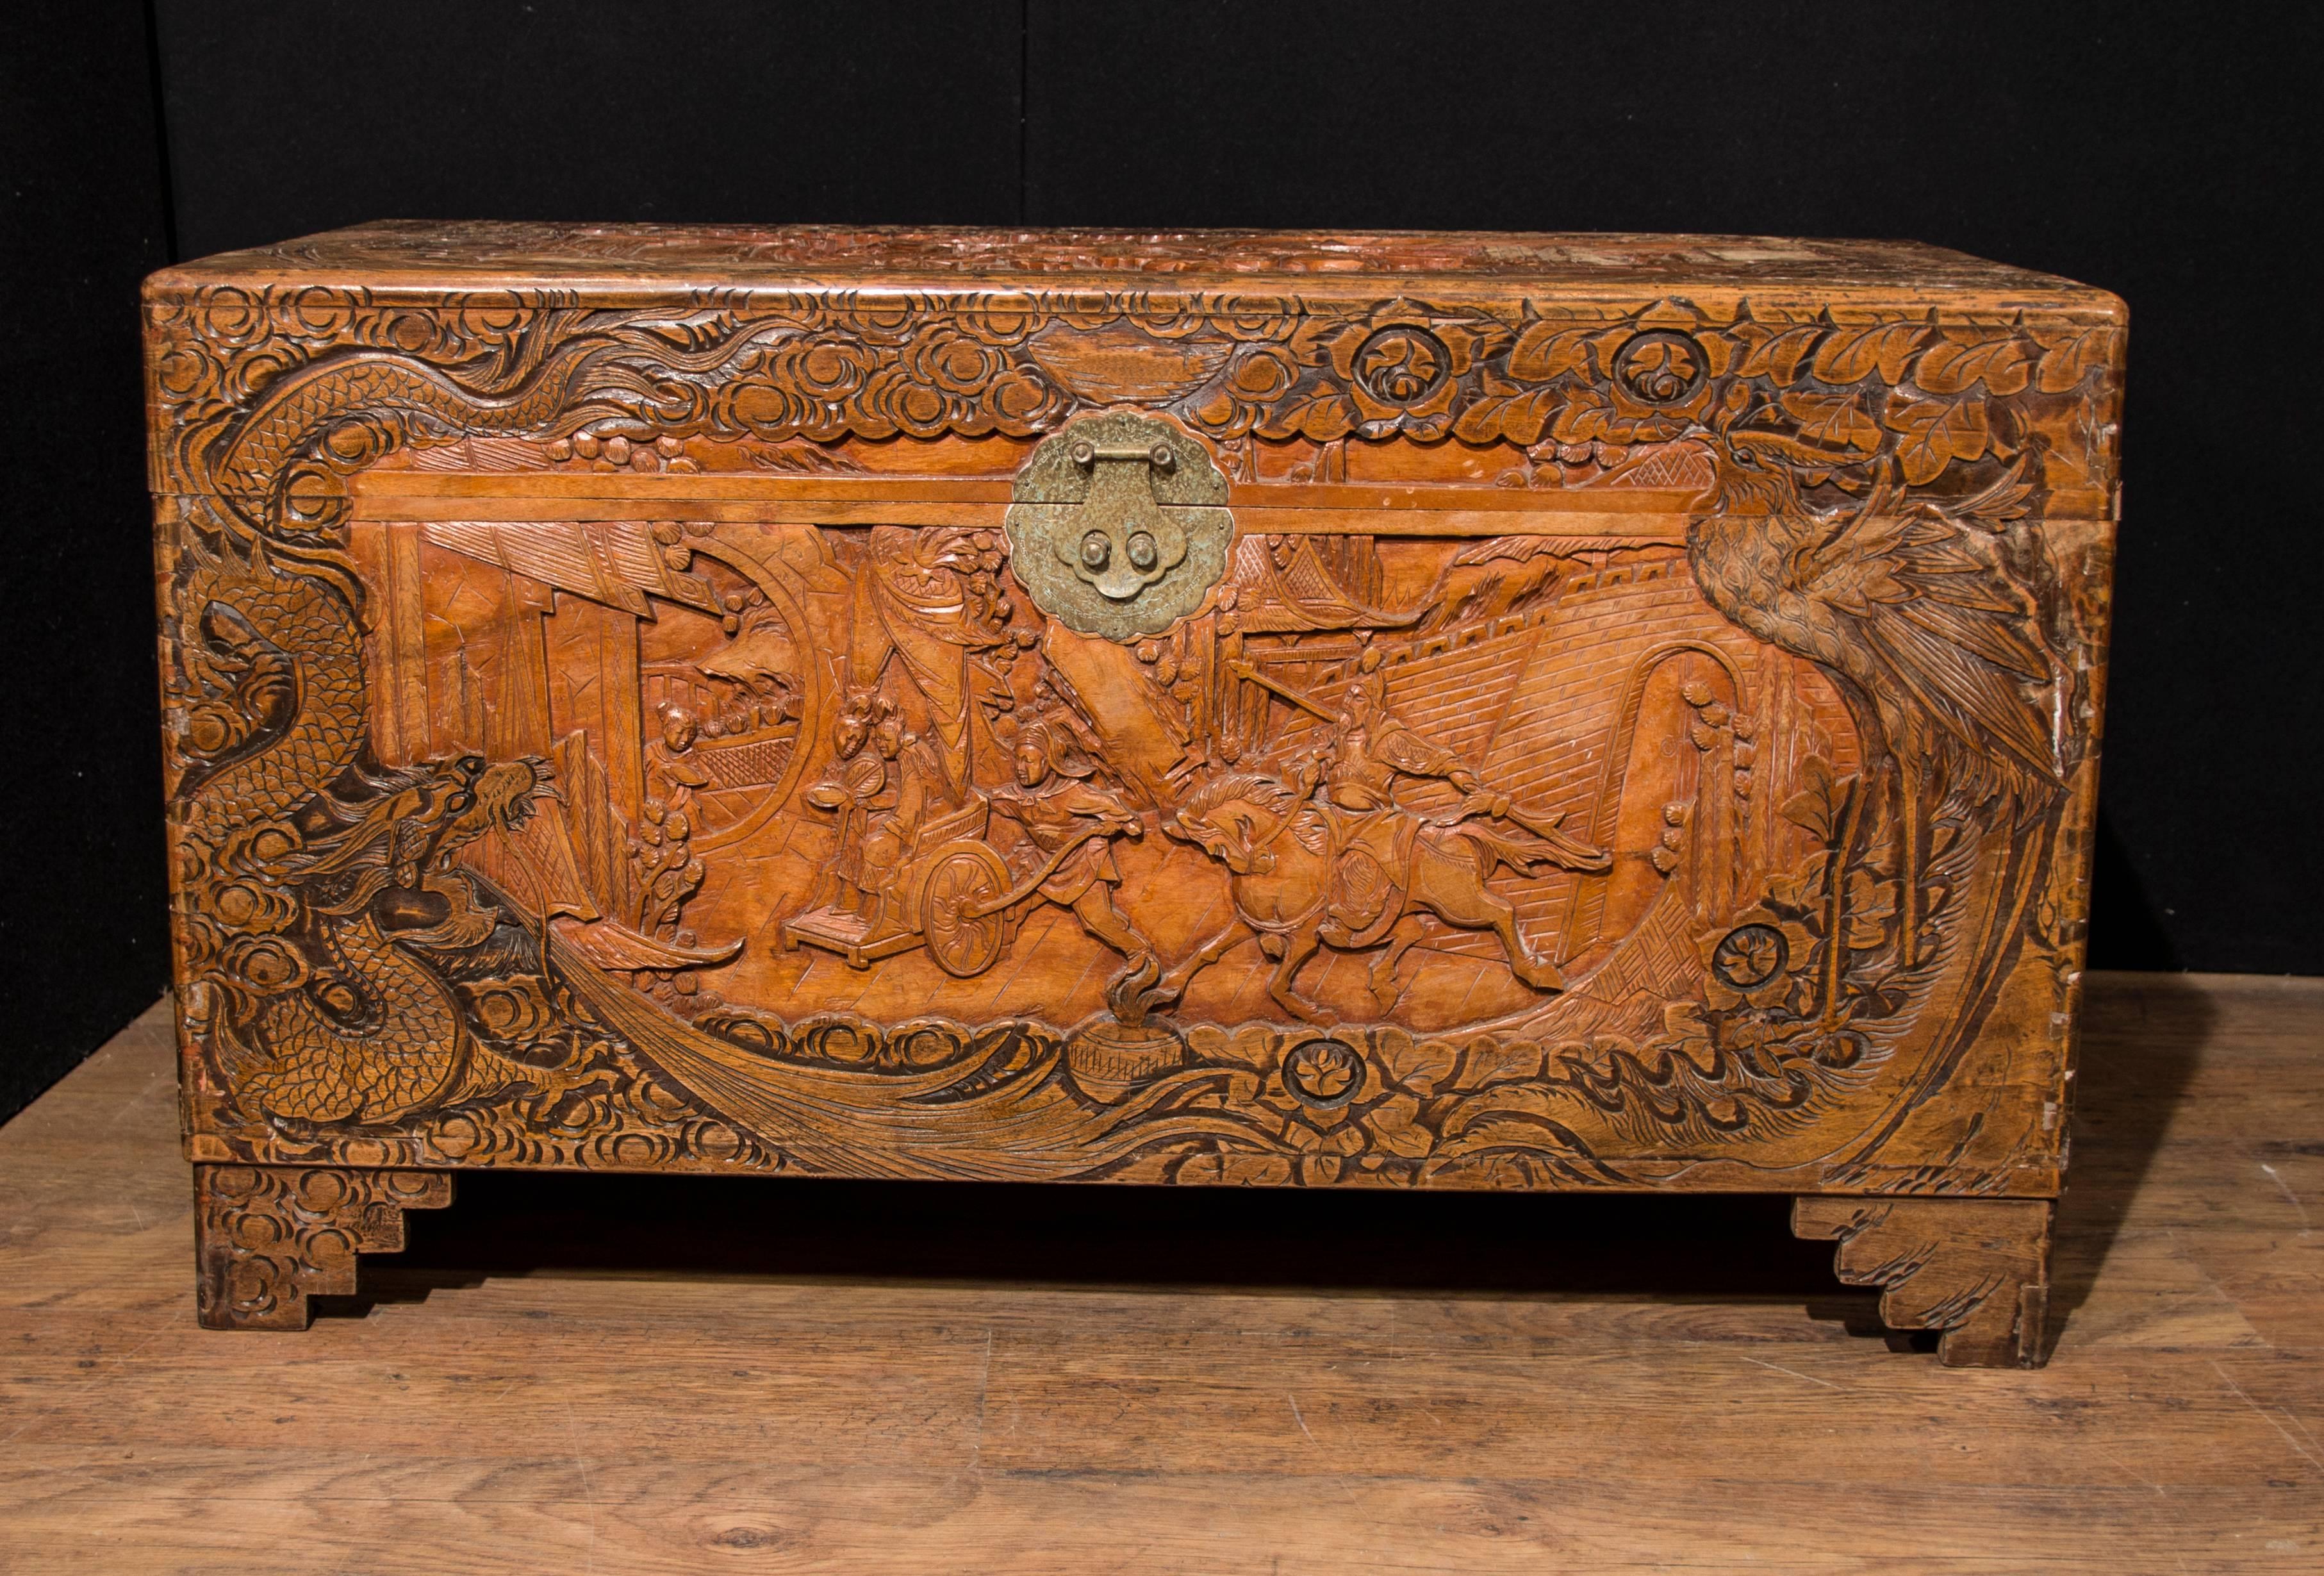 Gorgeous antique Chinese camphor wood trunk or luggage chest
Very intricately hand-carved with a profussion of details
In the 18th and 19th centuries, camphor chests were used to carry tea, silks and porcelain from China to European destinations,